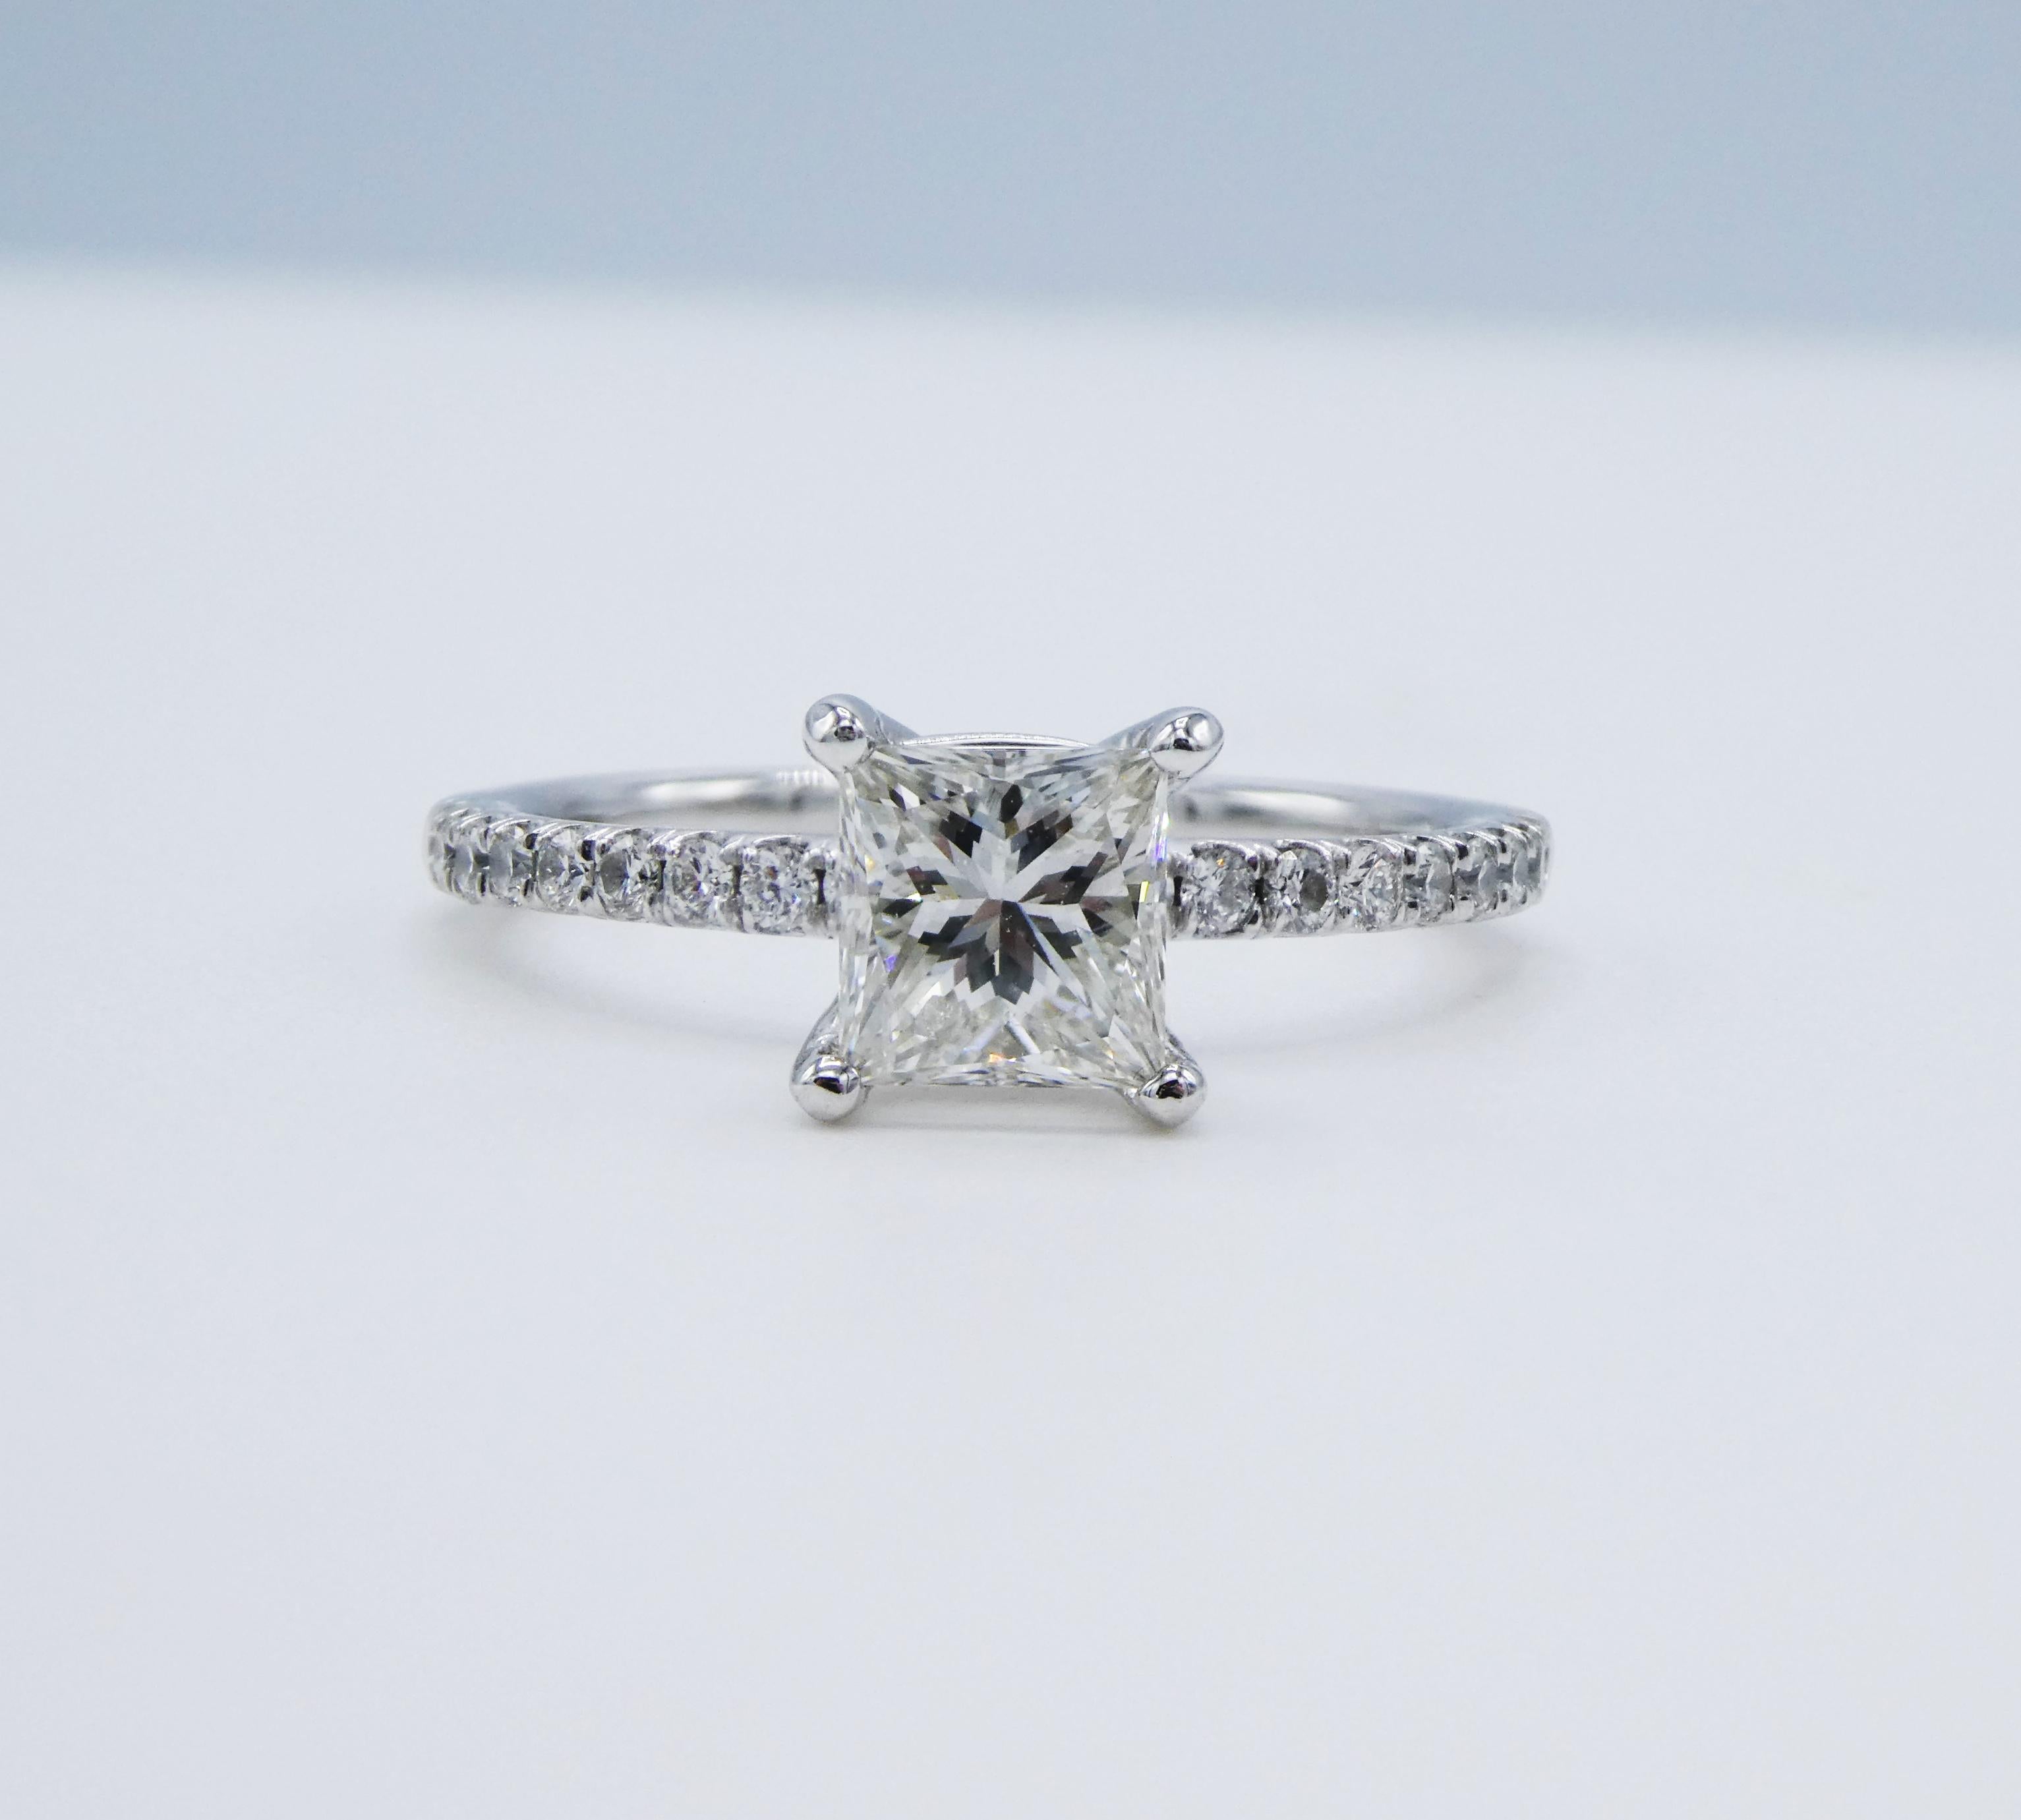 GIA Certified Princess Cut Diamond 0.98 Carat I I1 14K White Gold Solitaire Pave Diamond Setting Size 6.5

GIA Report Number: 2213155126 (GIA Report Copy pictured)
Diamond Shape: Square Modified Brilliant (Princess Cut) 
Carat Weight: 0.98